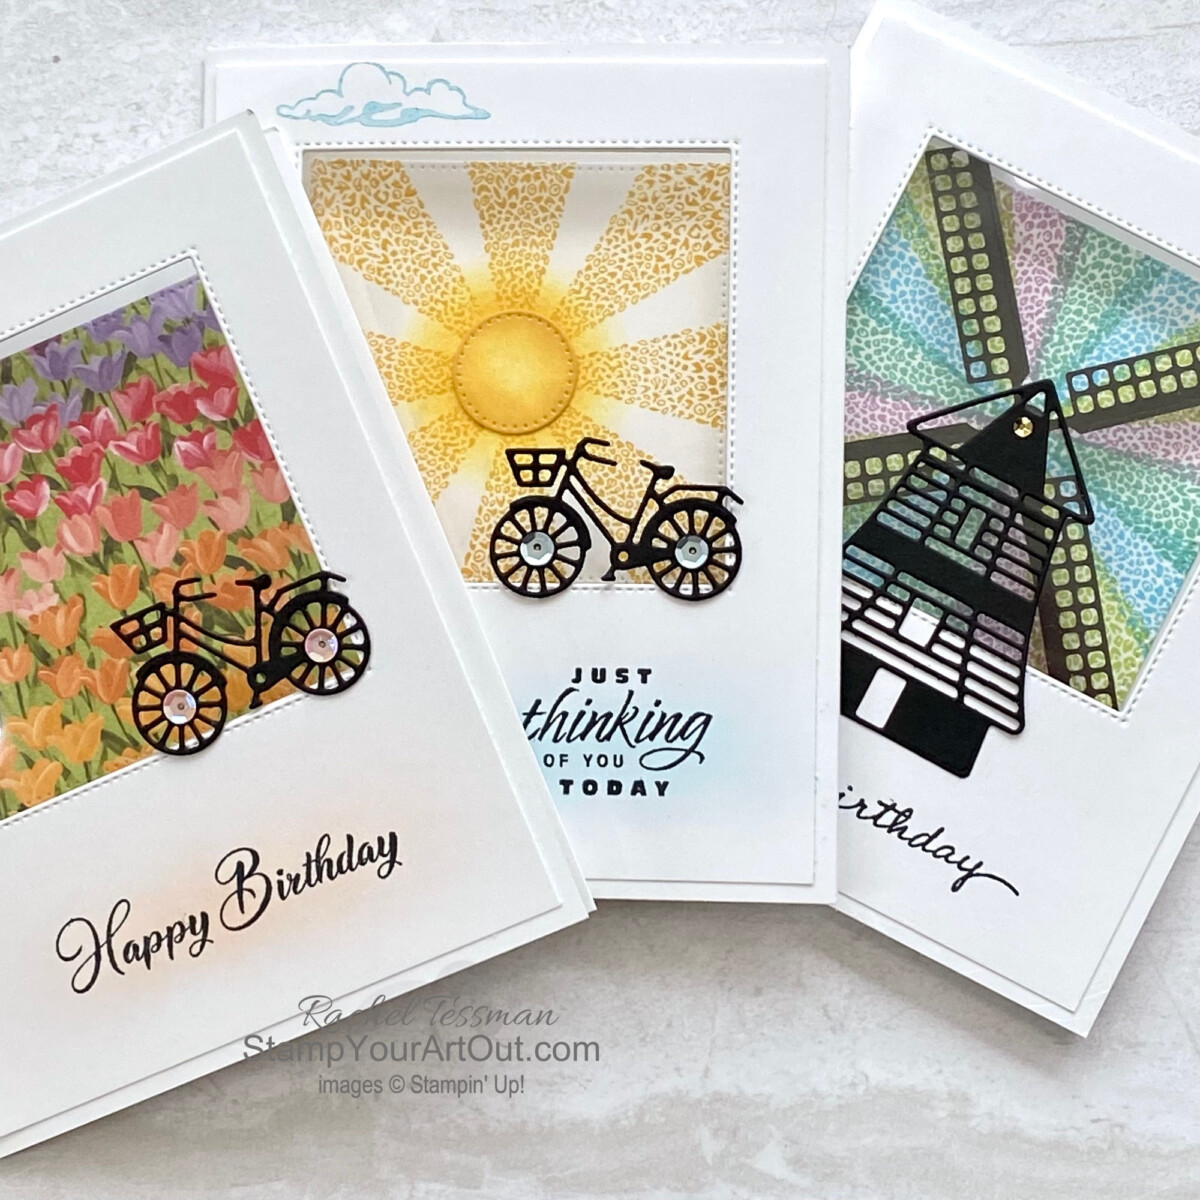 All Star Tutorial Blog Hop May 2022 featuring the Flowering Fields Suite of products from Stampin’ Up!’s Jan-June 2022 Mini Catalog. Click here to learn how I made these window cards featuring the Stamparatus Wreath Technique. Access measurements, tips for assembling, other close-up photos, and links to all the products I used. Learn how to grab up the awesome exclusive tutorial bundle. AND see other great ideas with this suite shared by the eleven others in our tutorial group! - Stampin’ Up!® - Stamp Your Art Out! www.stampyourartout.com